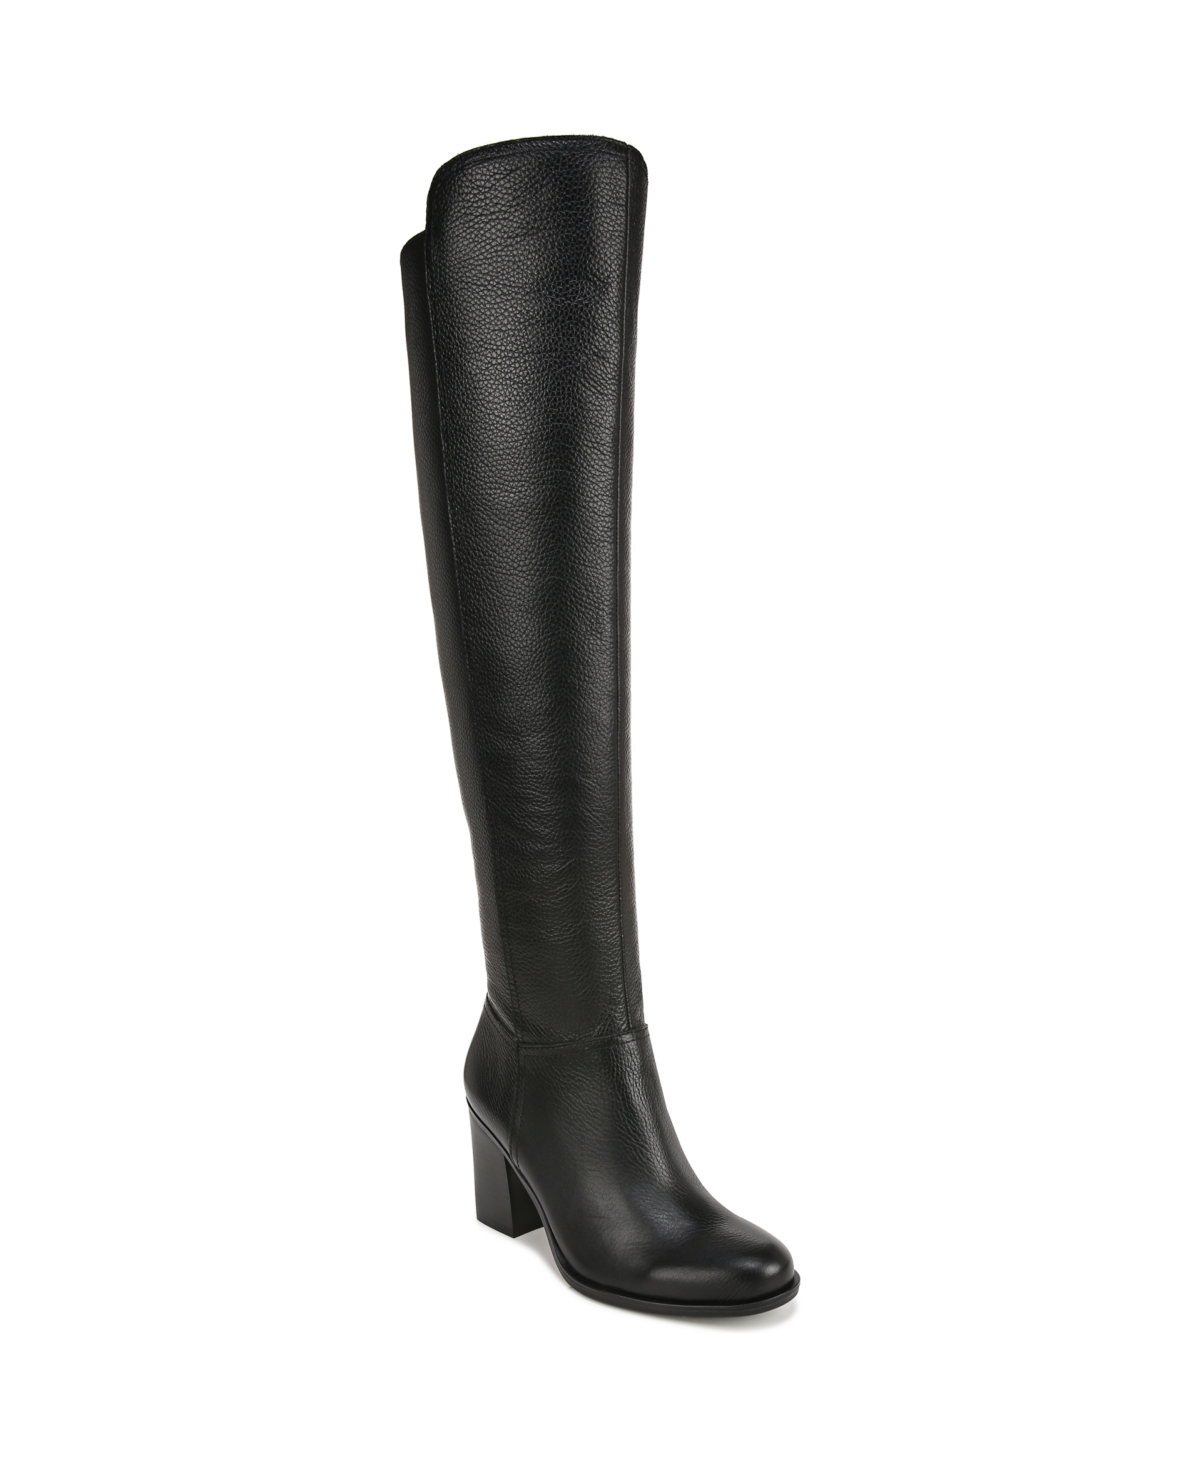 Kyrie Wide Calf Water-Resistant Over-the-Knee Boots - Black Leather